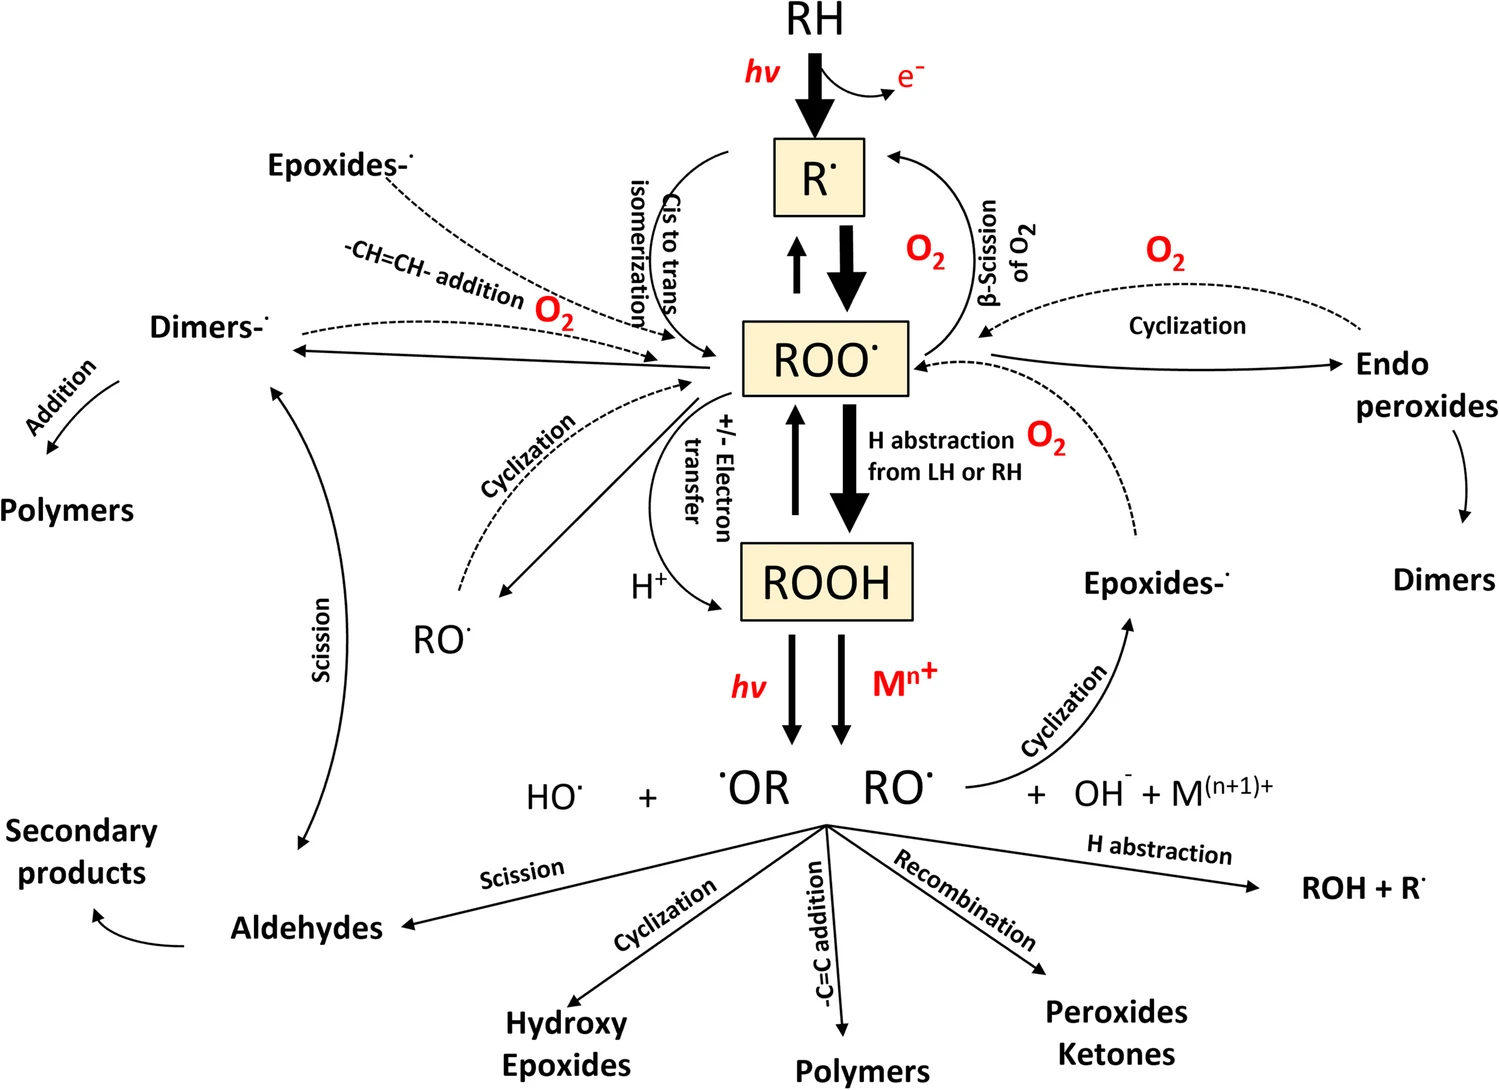 Oxidative Stability in Lipid Formulations: a Review of the Mechanisms, Drivers, and Inhibitors of Oxidation